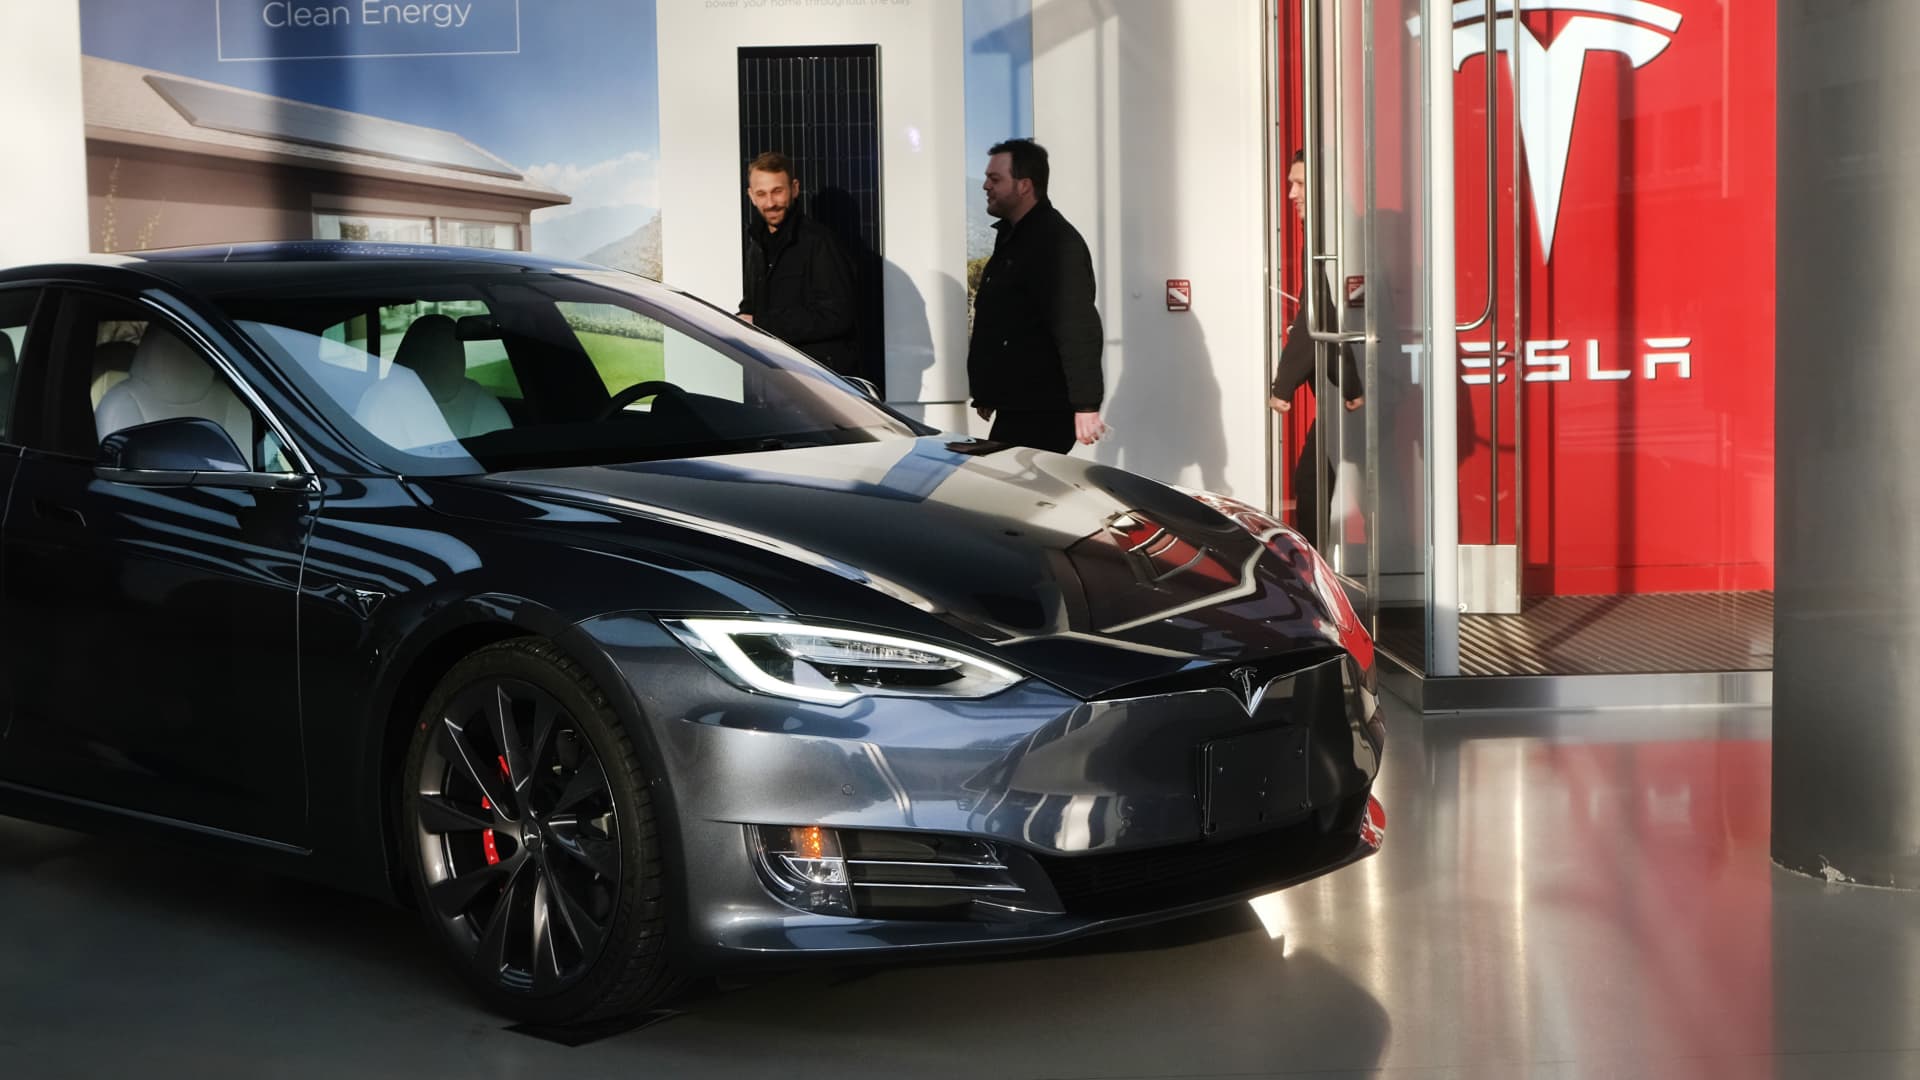 Tesla is still dominant, but its U.S. market share is eroding as cheaper EVs arrive Auto Recent